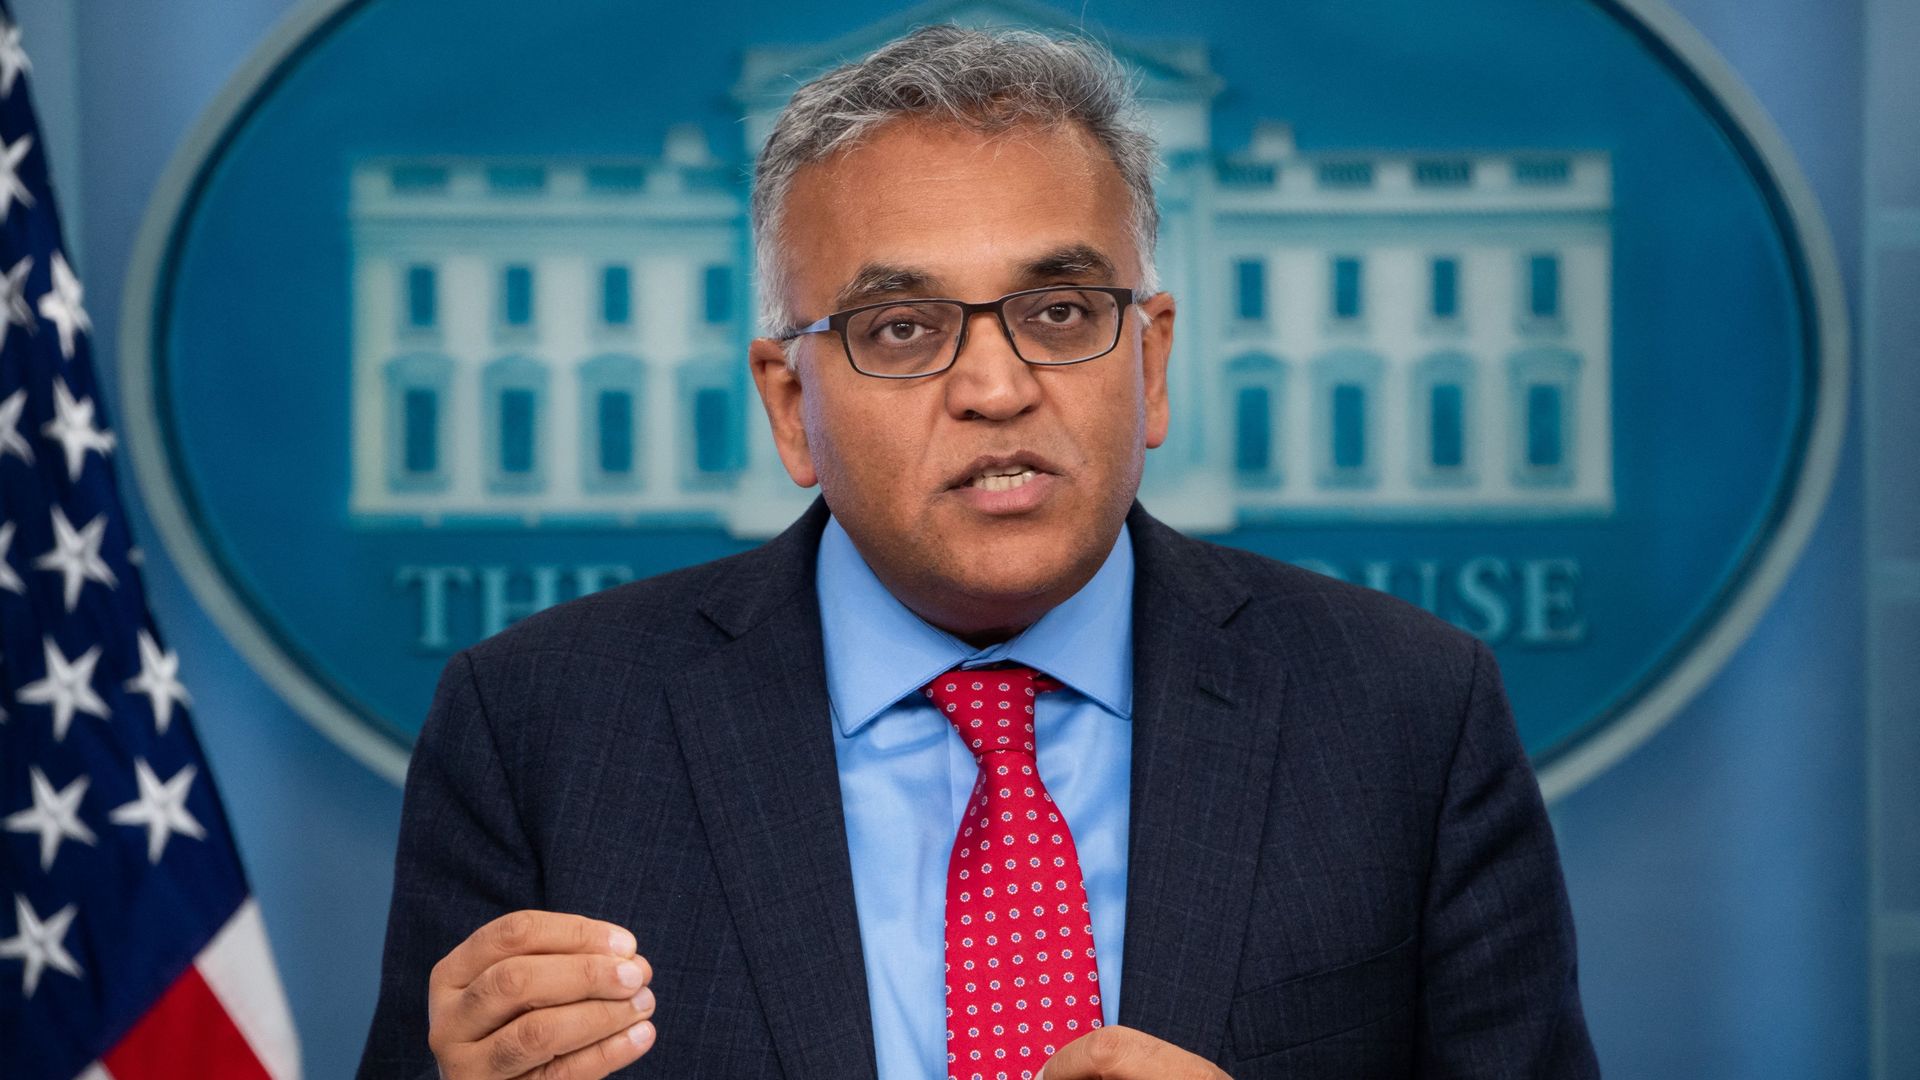 Ashish Jha is seen speaking at the daily White House press briefing.